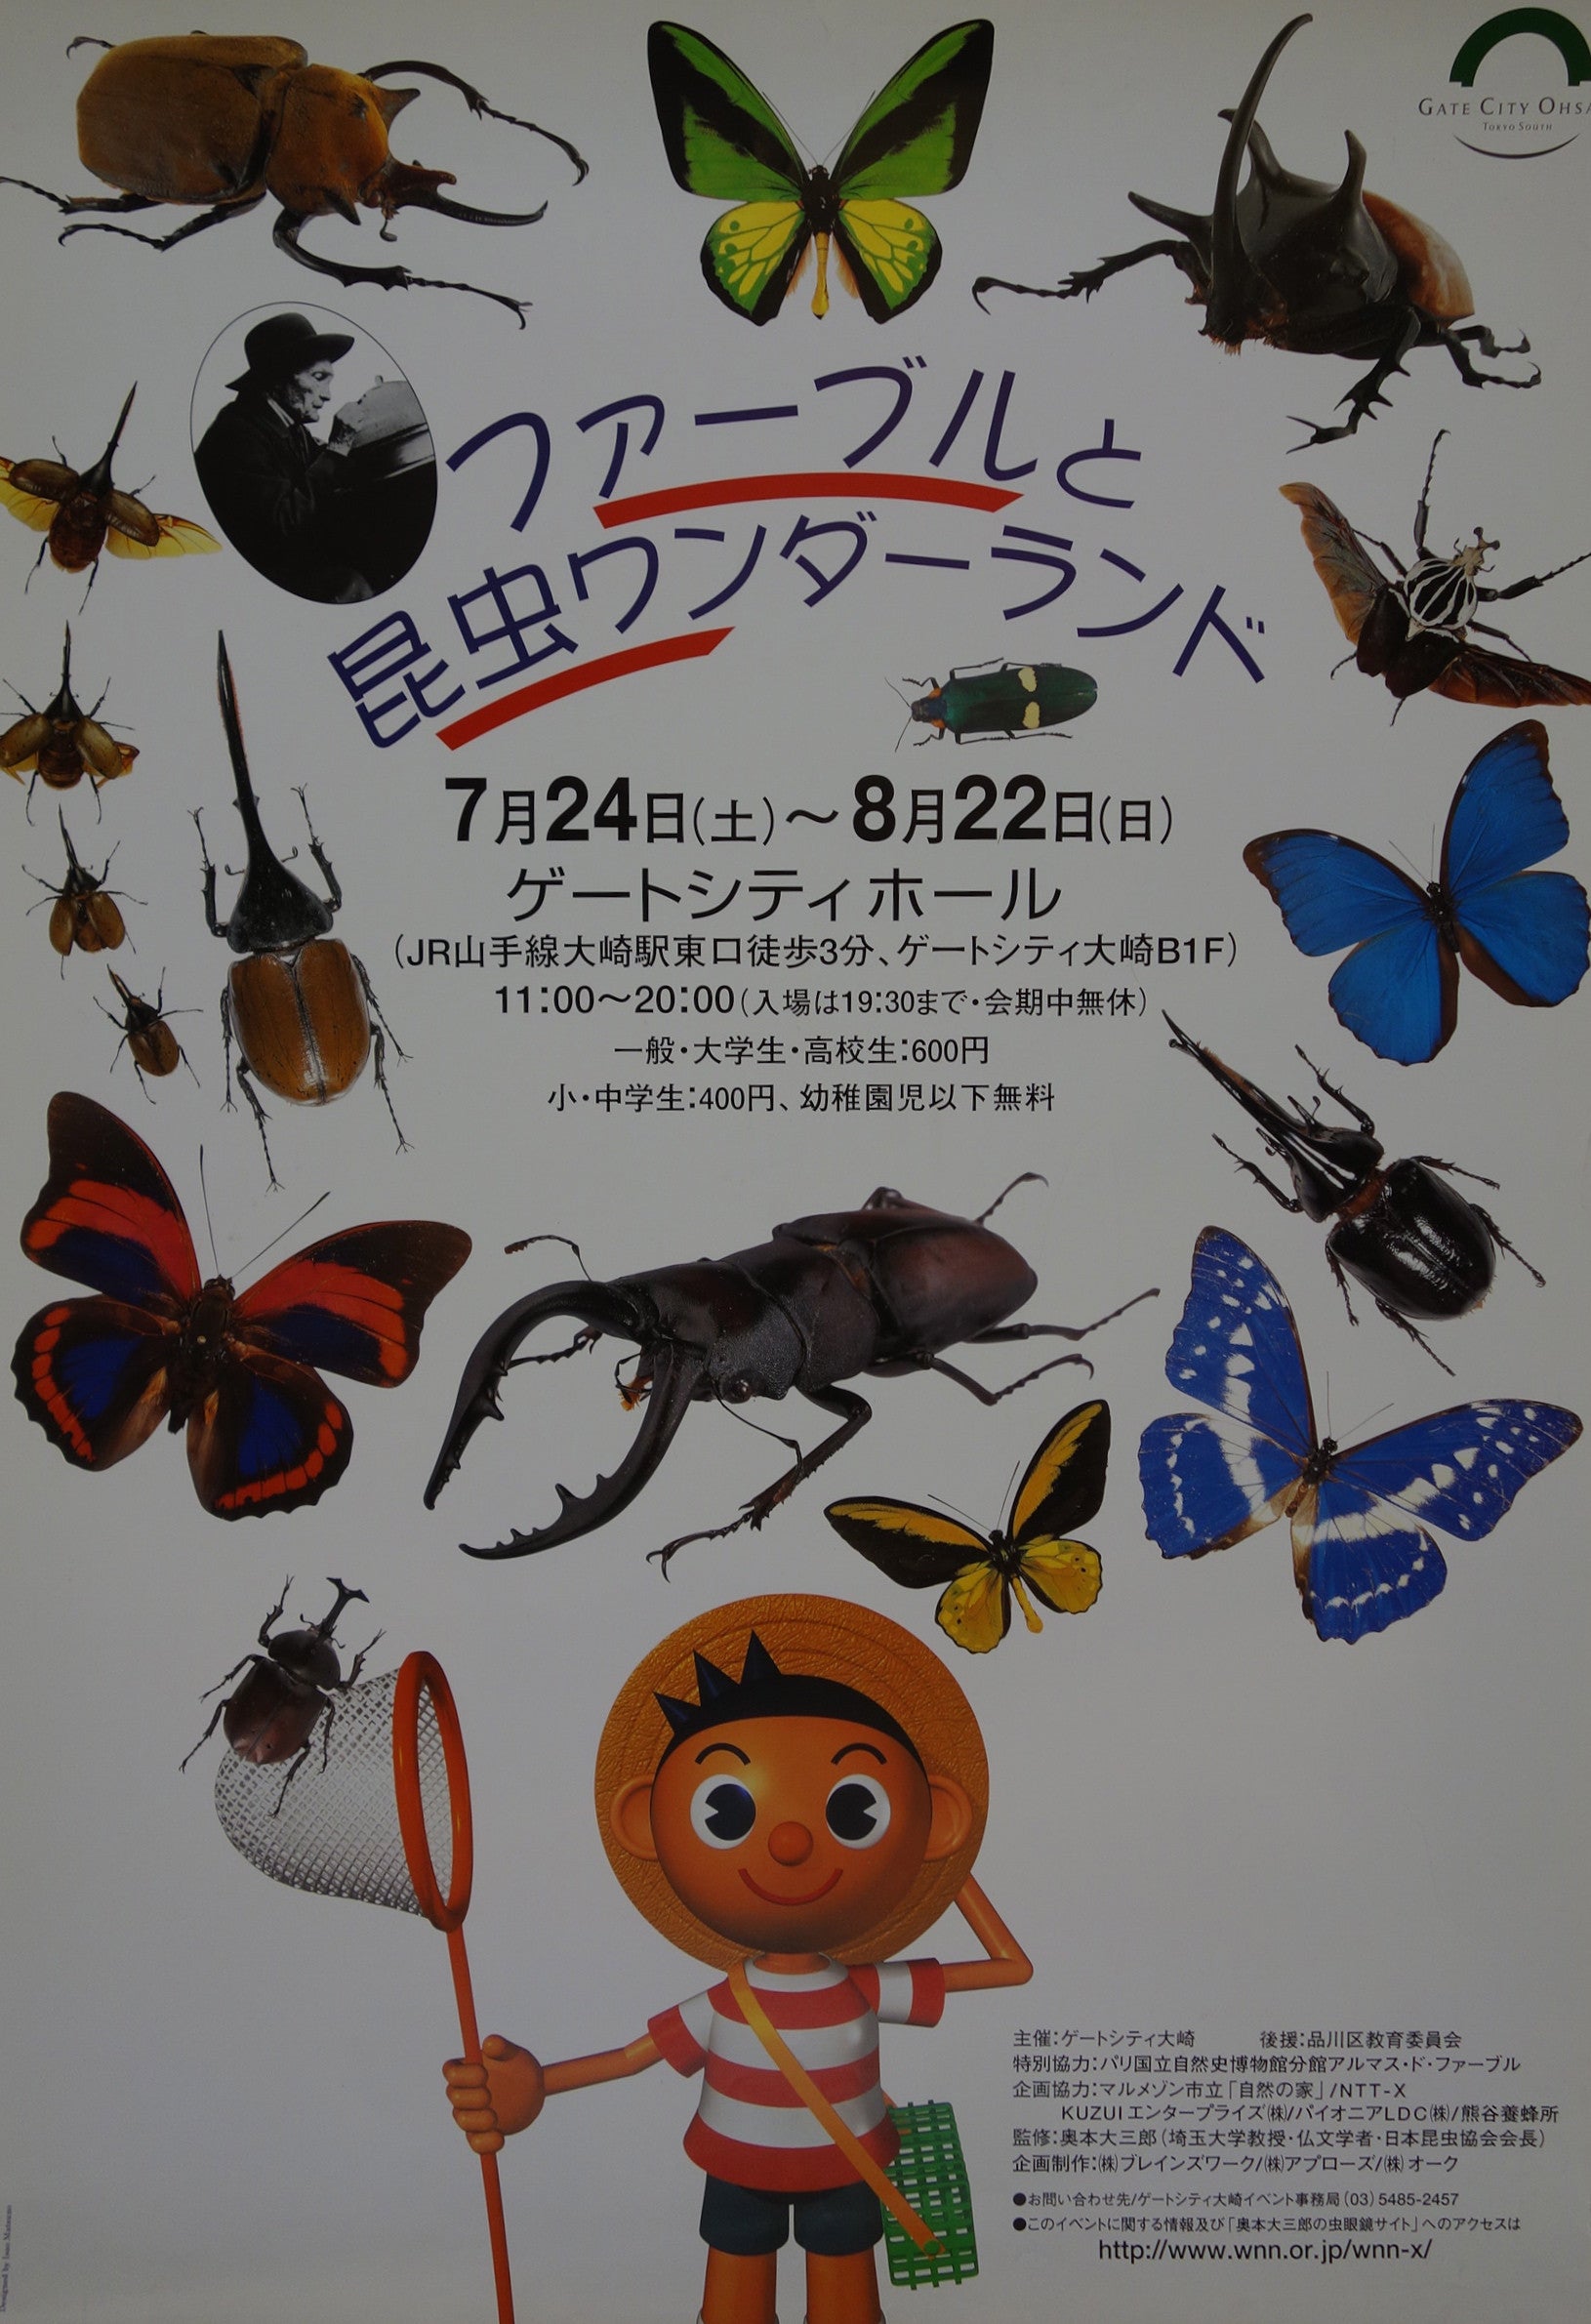 Fabre and insects' wonder land